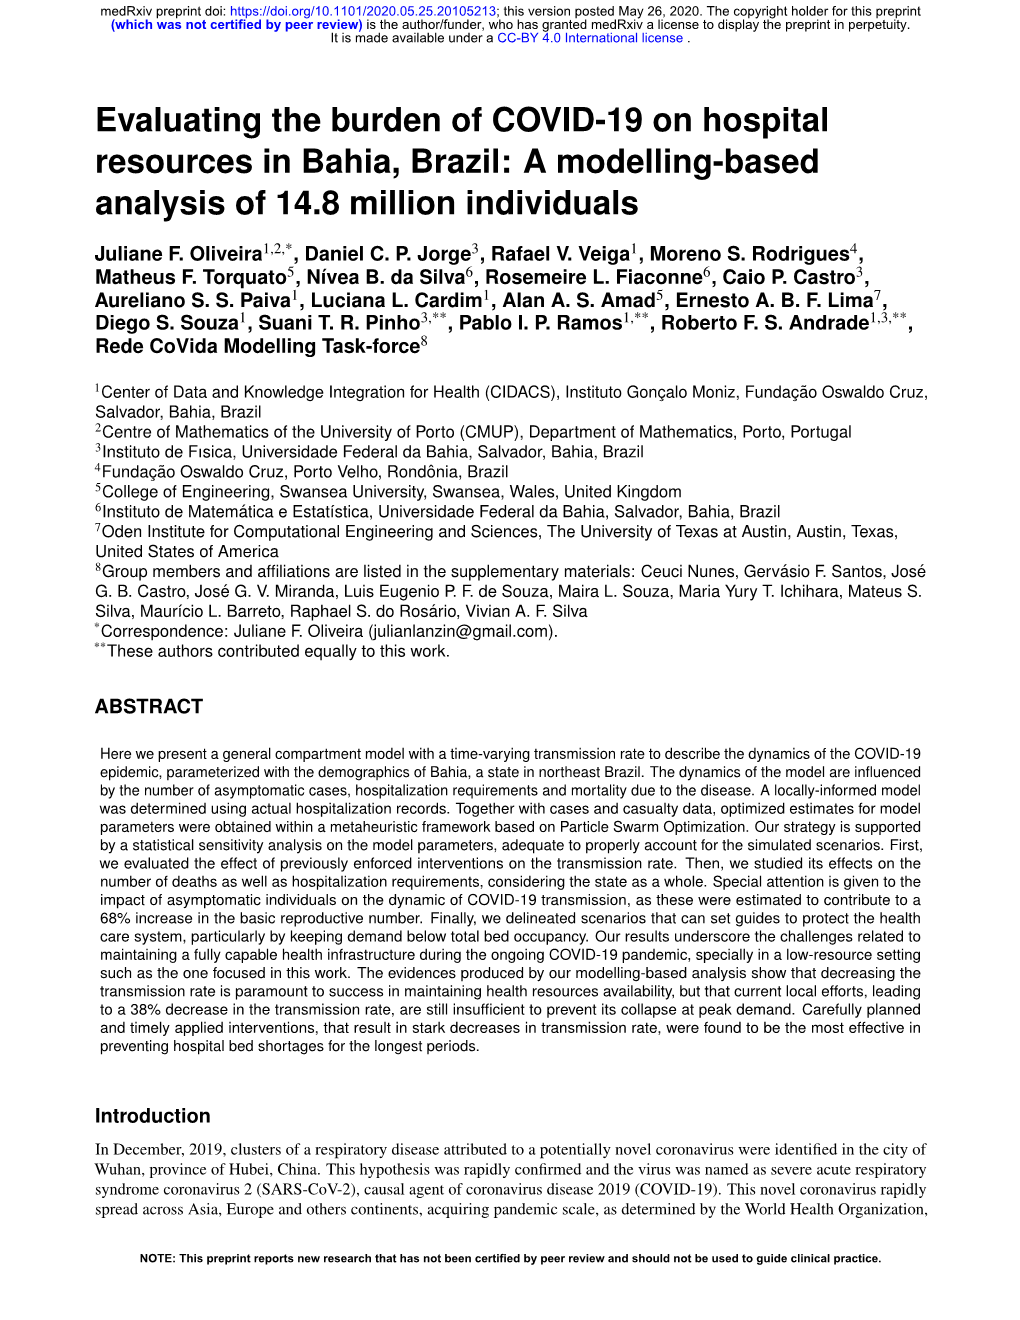 Evaluating the Burden of COVID-19 on Hospital Resources in Bahia, Brazil: a Modelling-Based Analysis of 14.8 Million Individuals